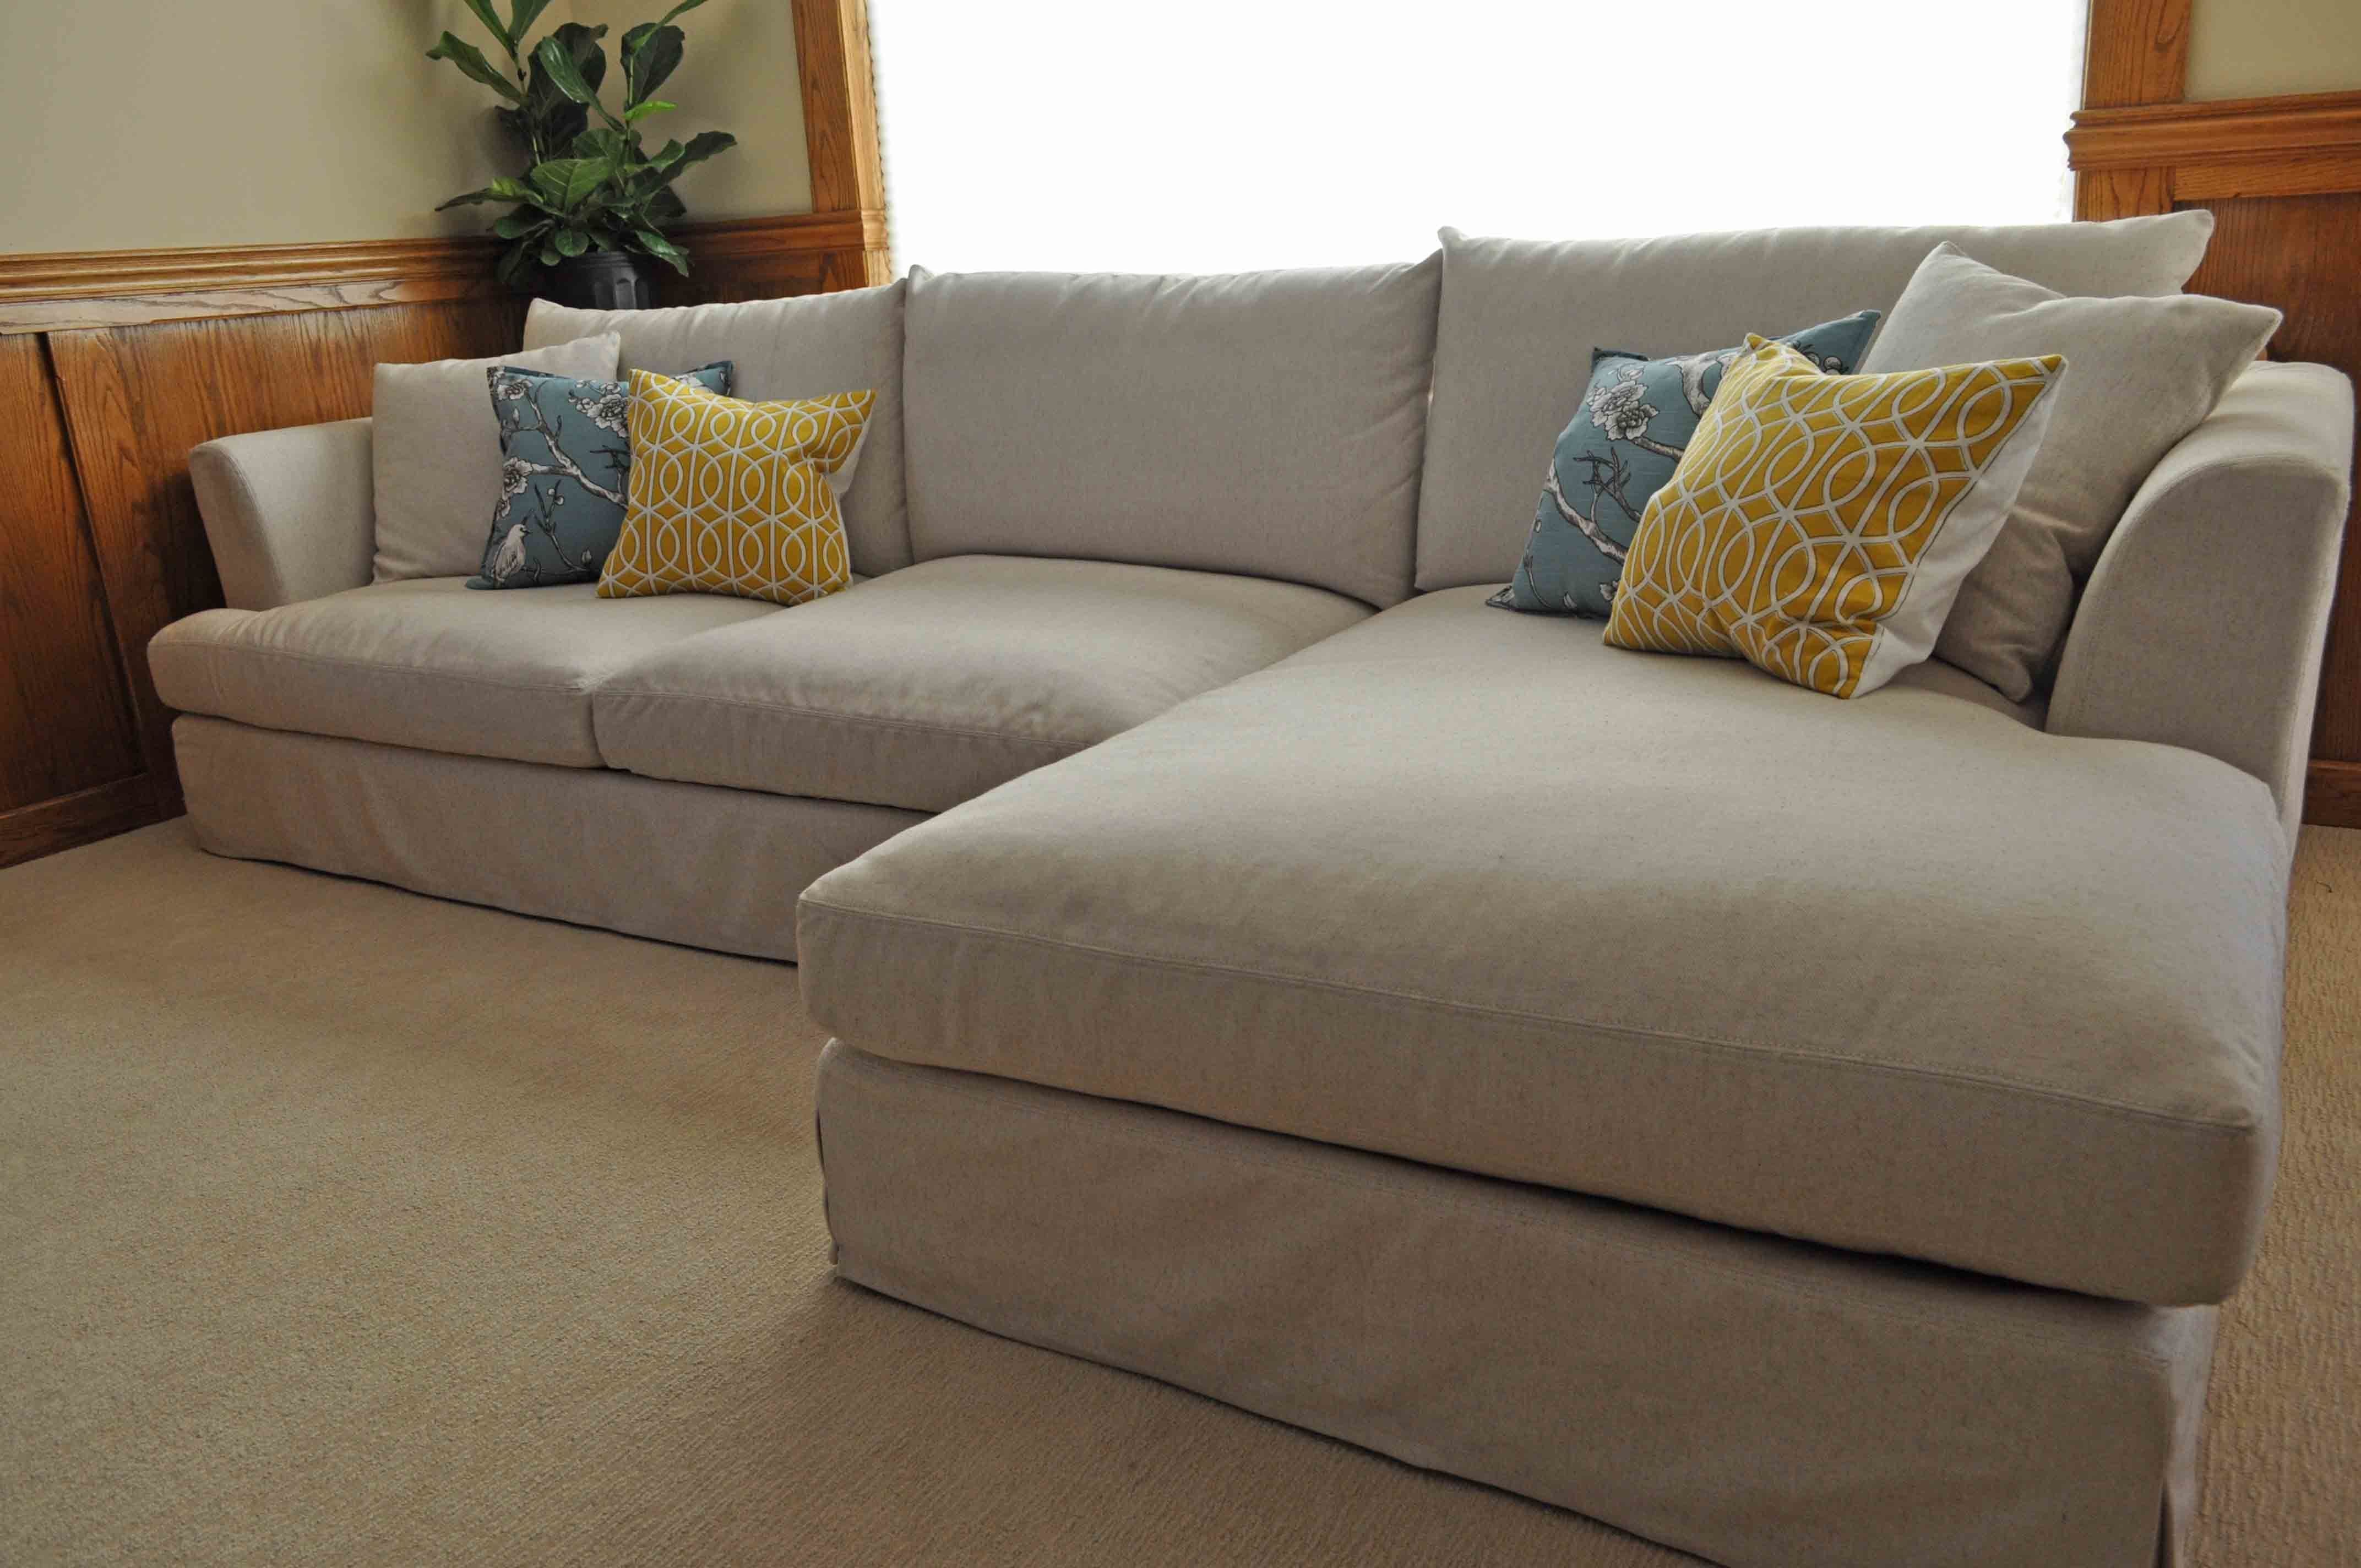 Most Comfortable Sectional Sofa 20 With Most Comfortable Sectional Inside Comfortable Sectional Sofa (View 6 of 15)